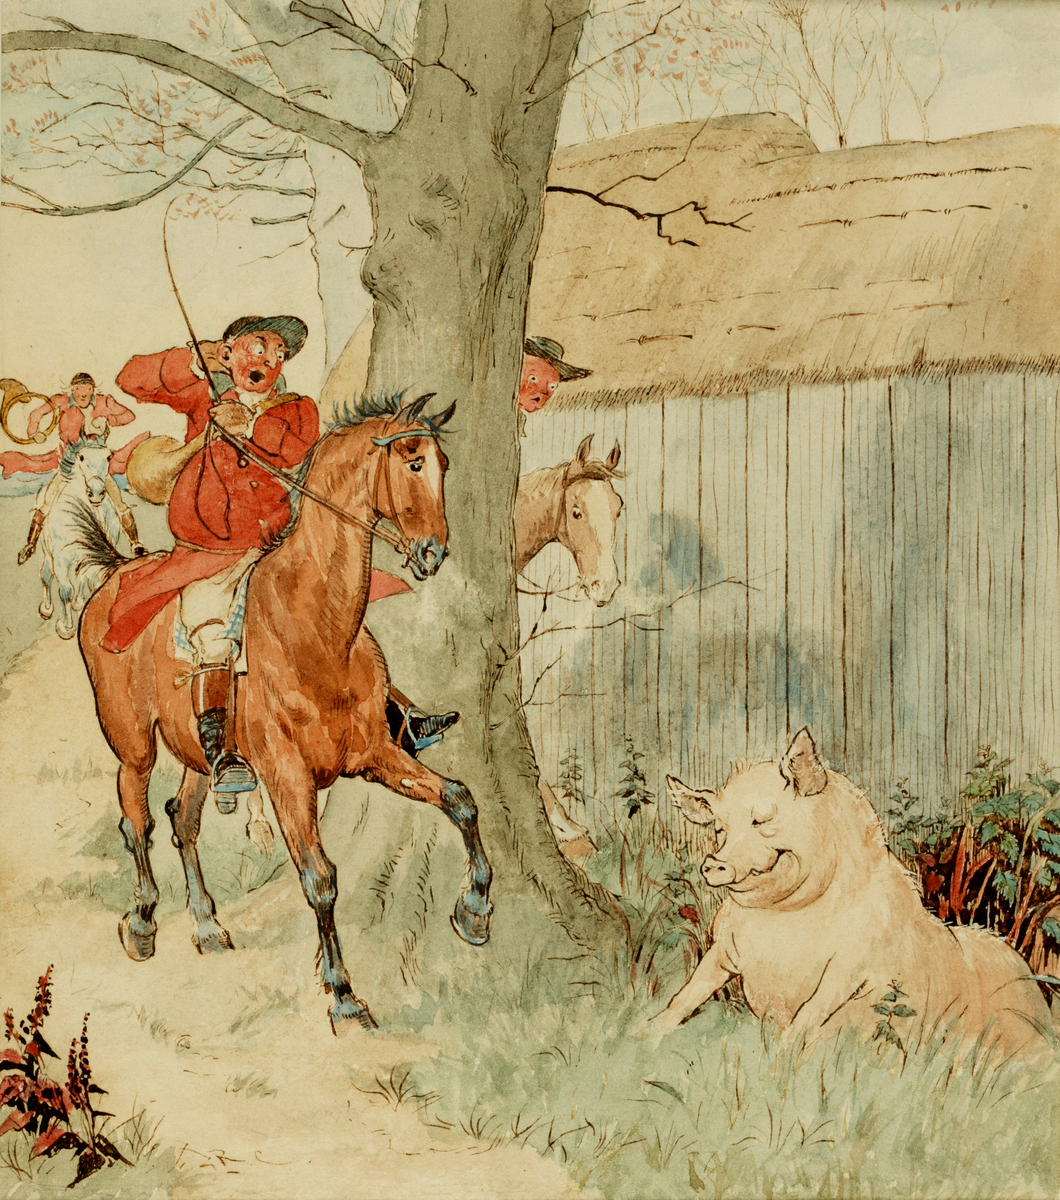 'One Said it was a Fat Pig'  (Illustration for 'The Three Jovial Huntsmen Picture Book No.5 publ. 1880)